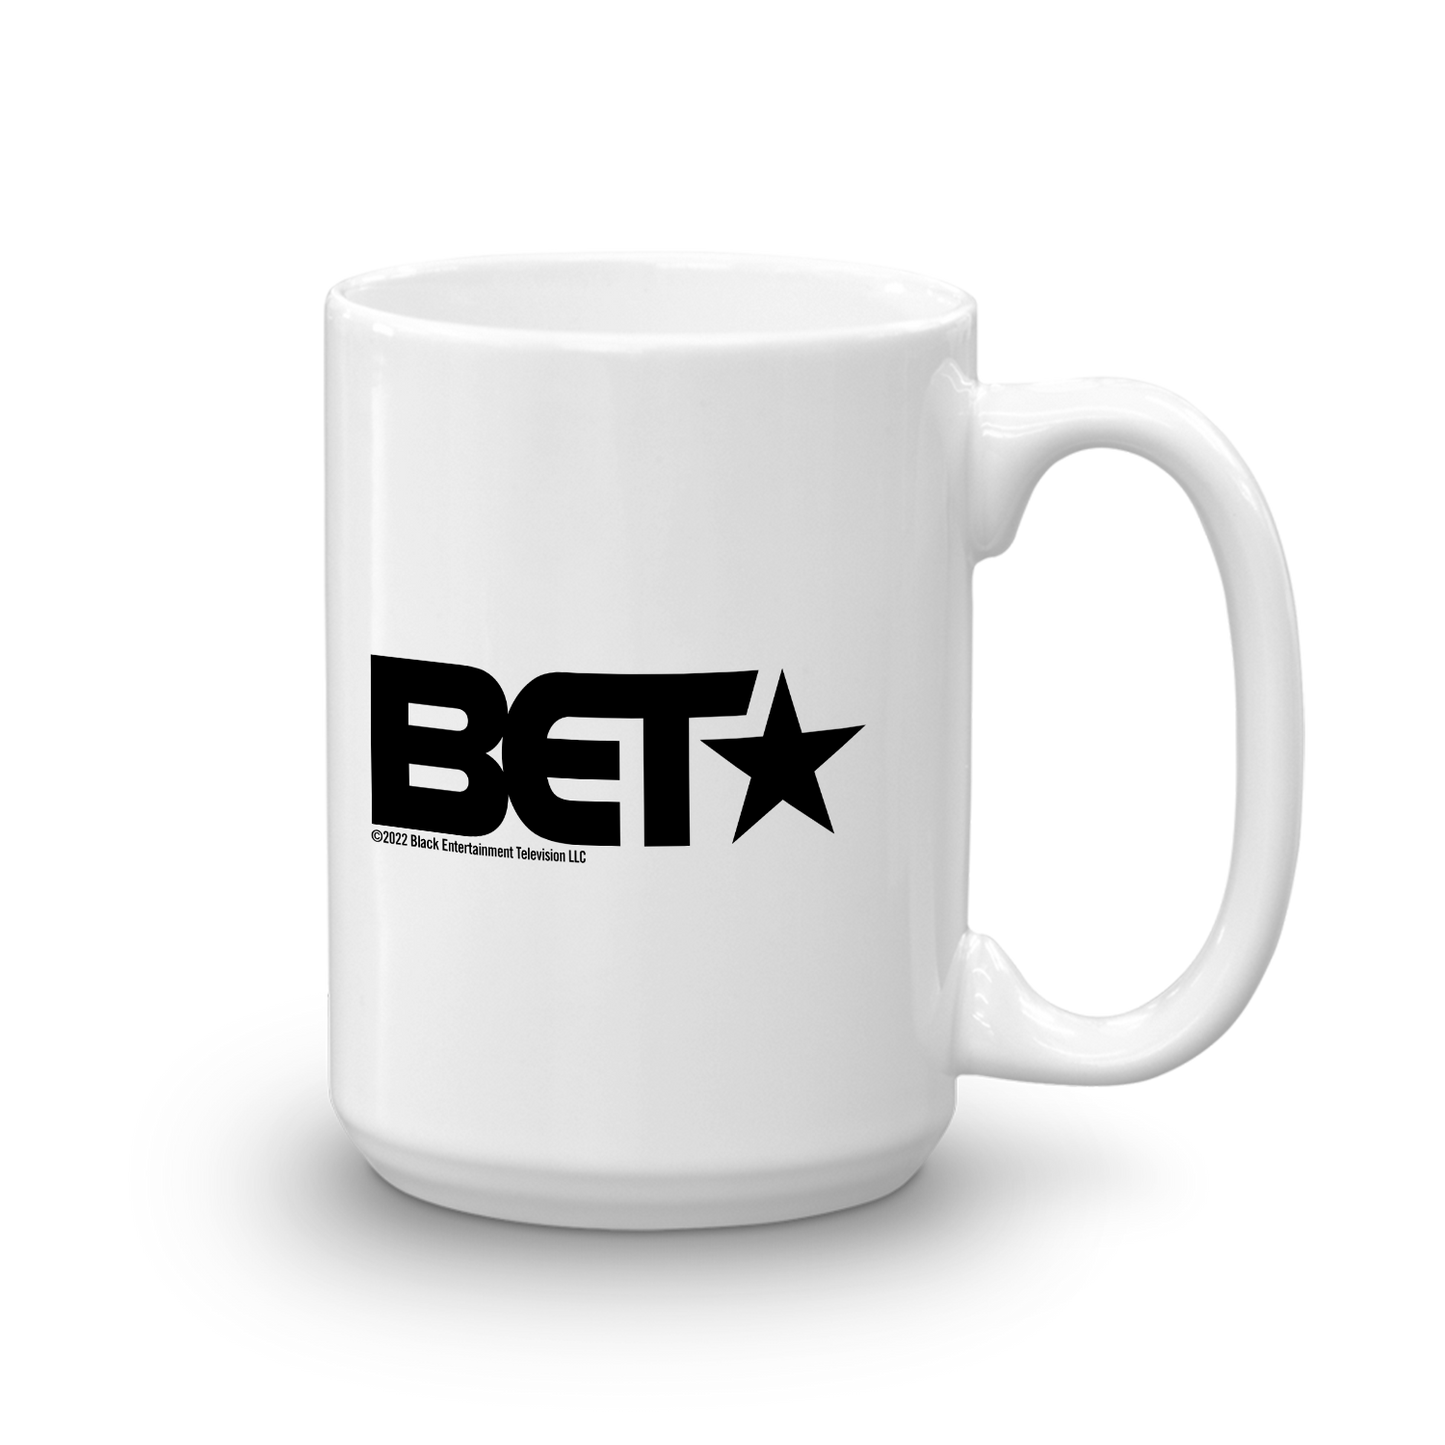 BET Black Is In The Name White Mug